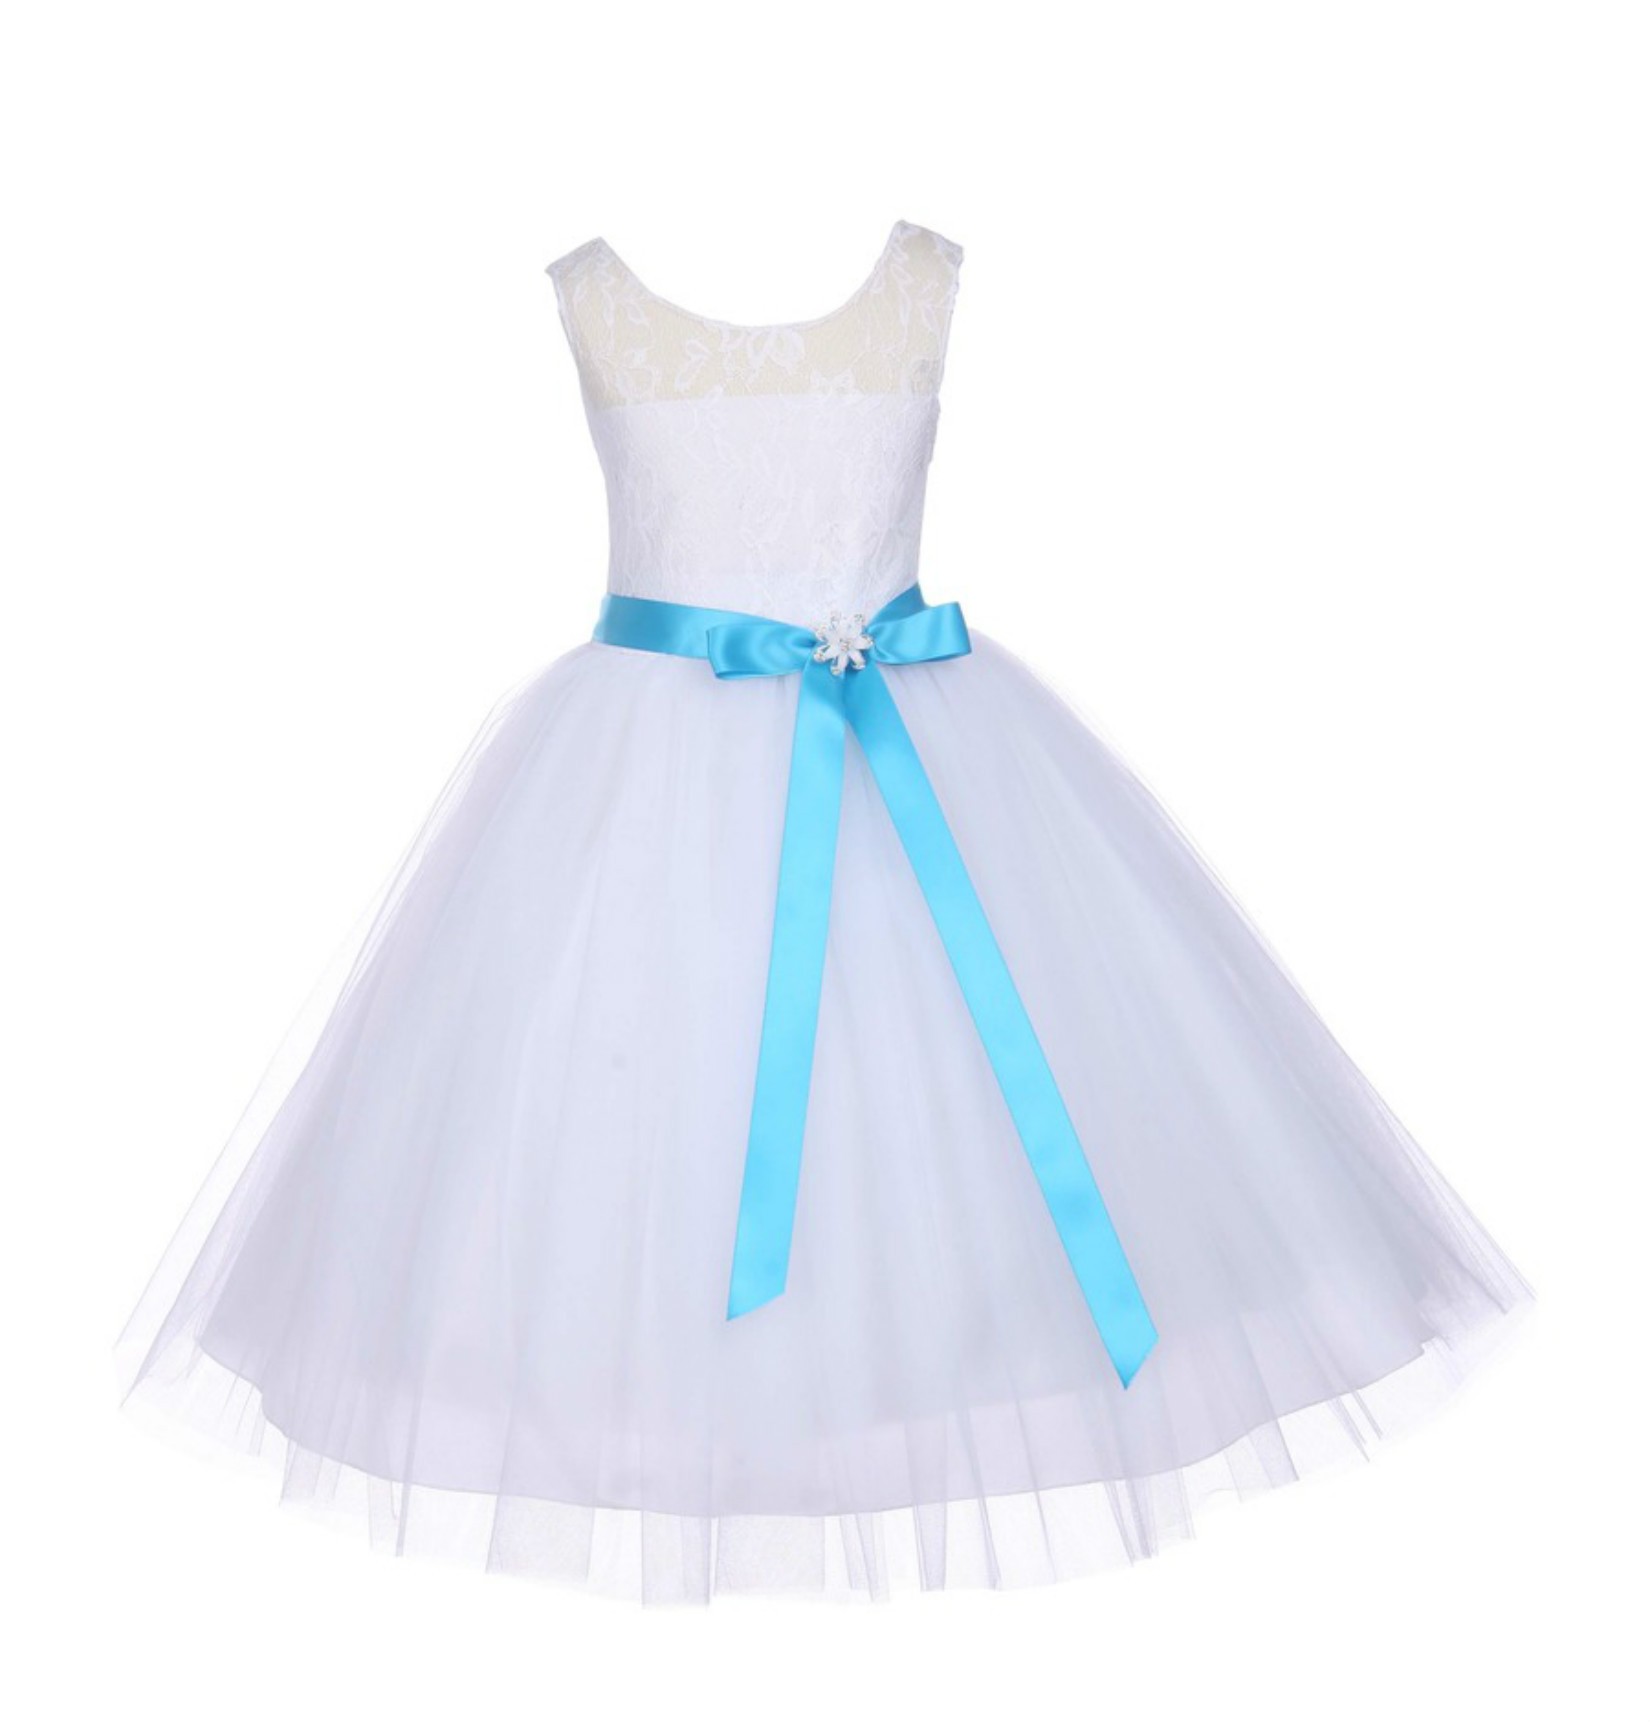 White Floral Lace Bodice Tulle Turquoise Ribbon Flower Girl Dress 153R